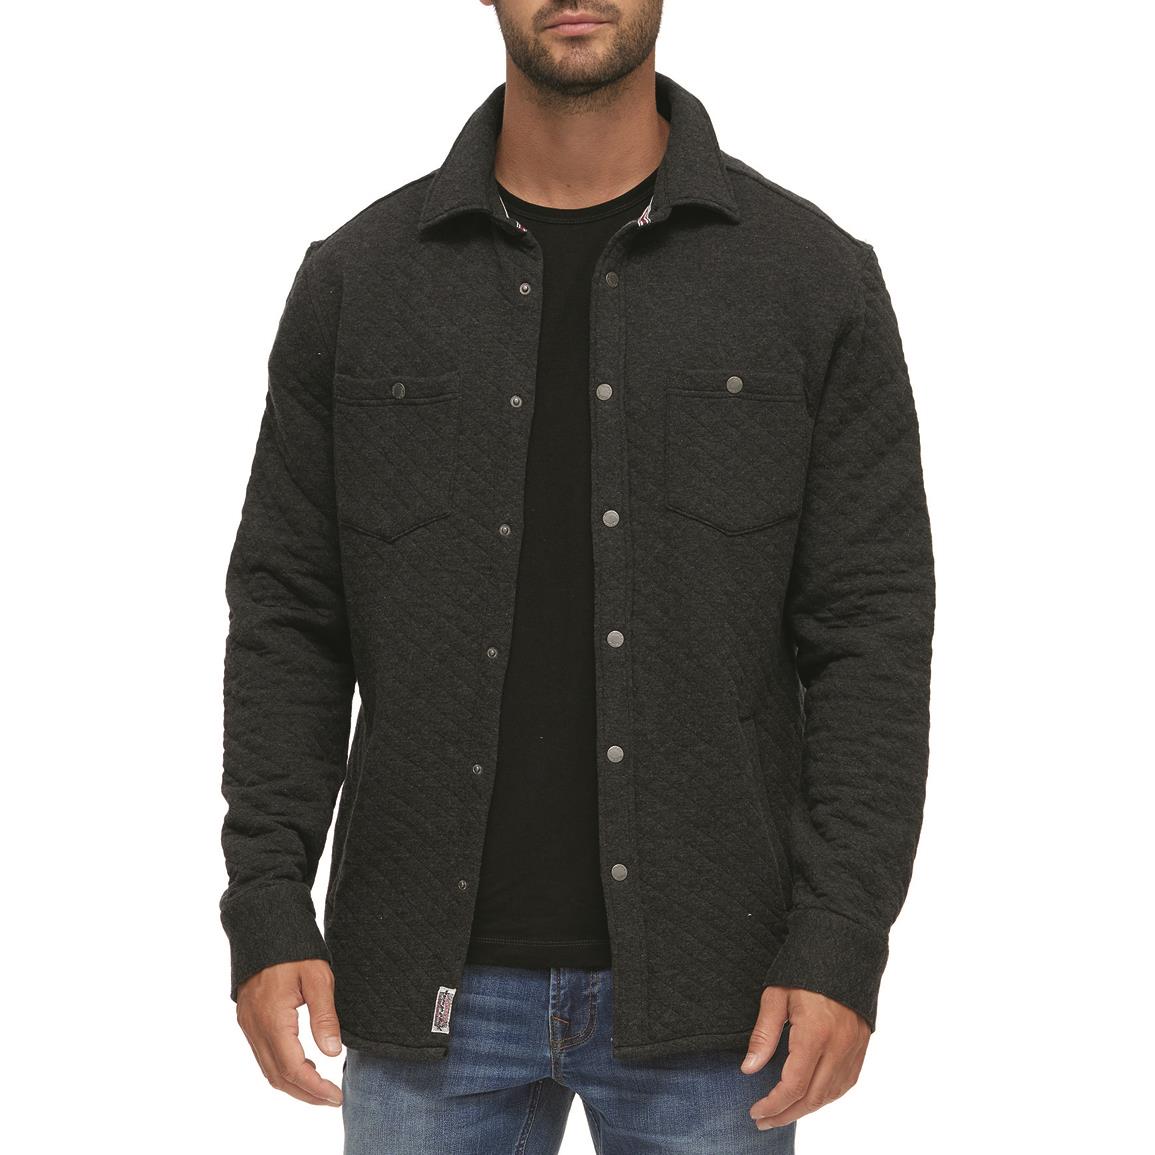 Flag & Anthem Men's Alloway Quilted Shirt Jacket, Charcoal Heather